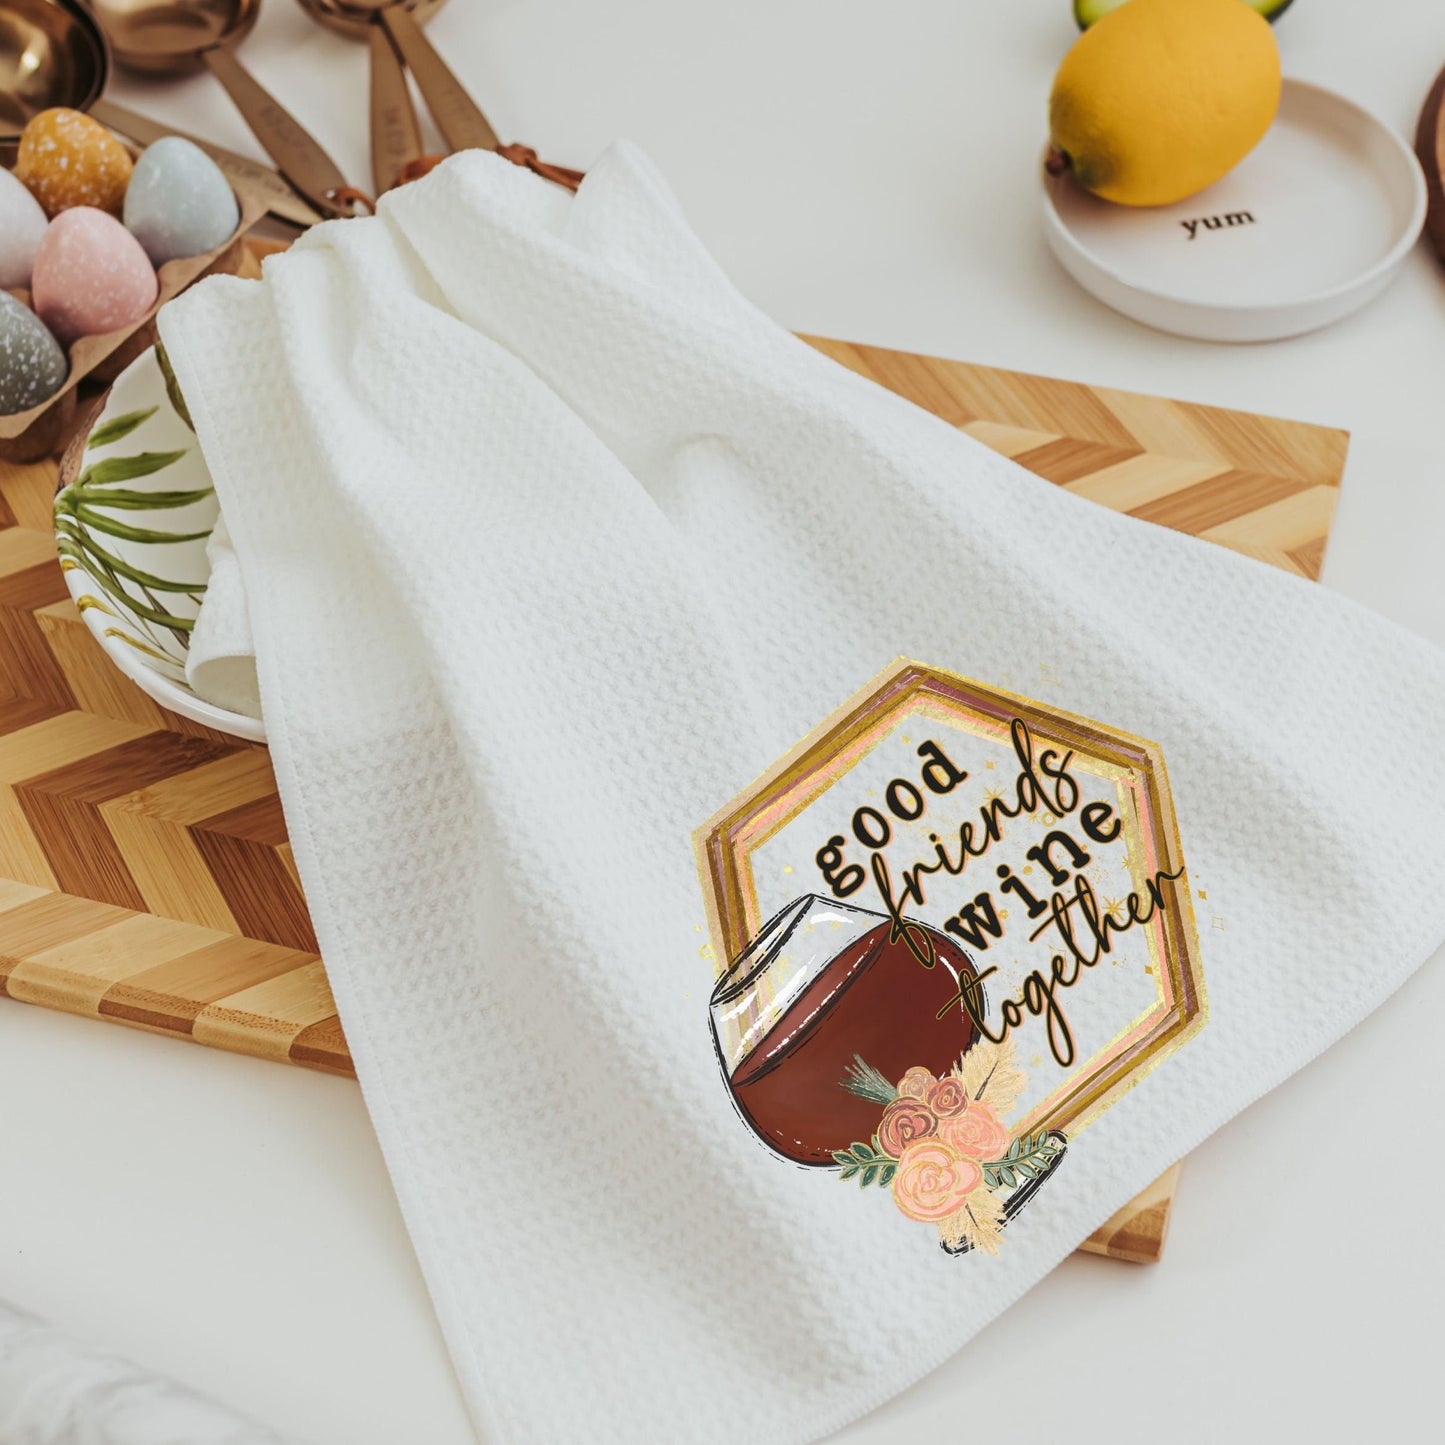 Good Friends and Wine Together Kitchen Towels